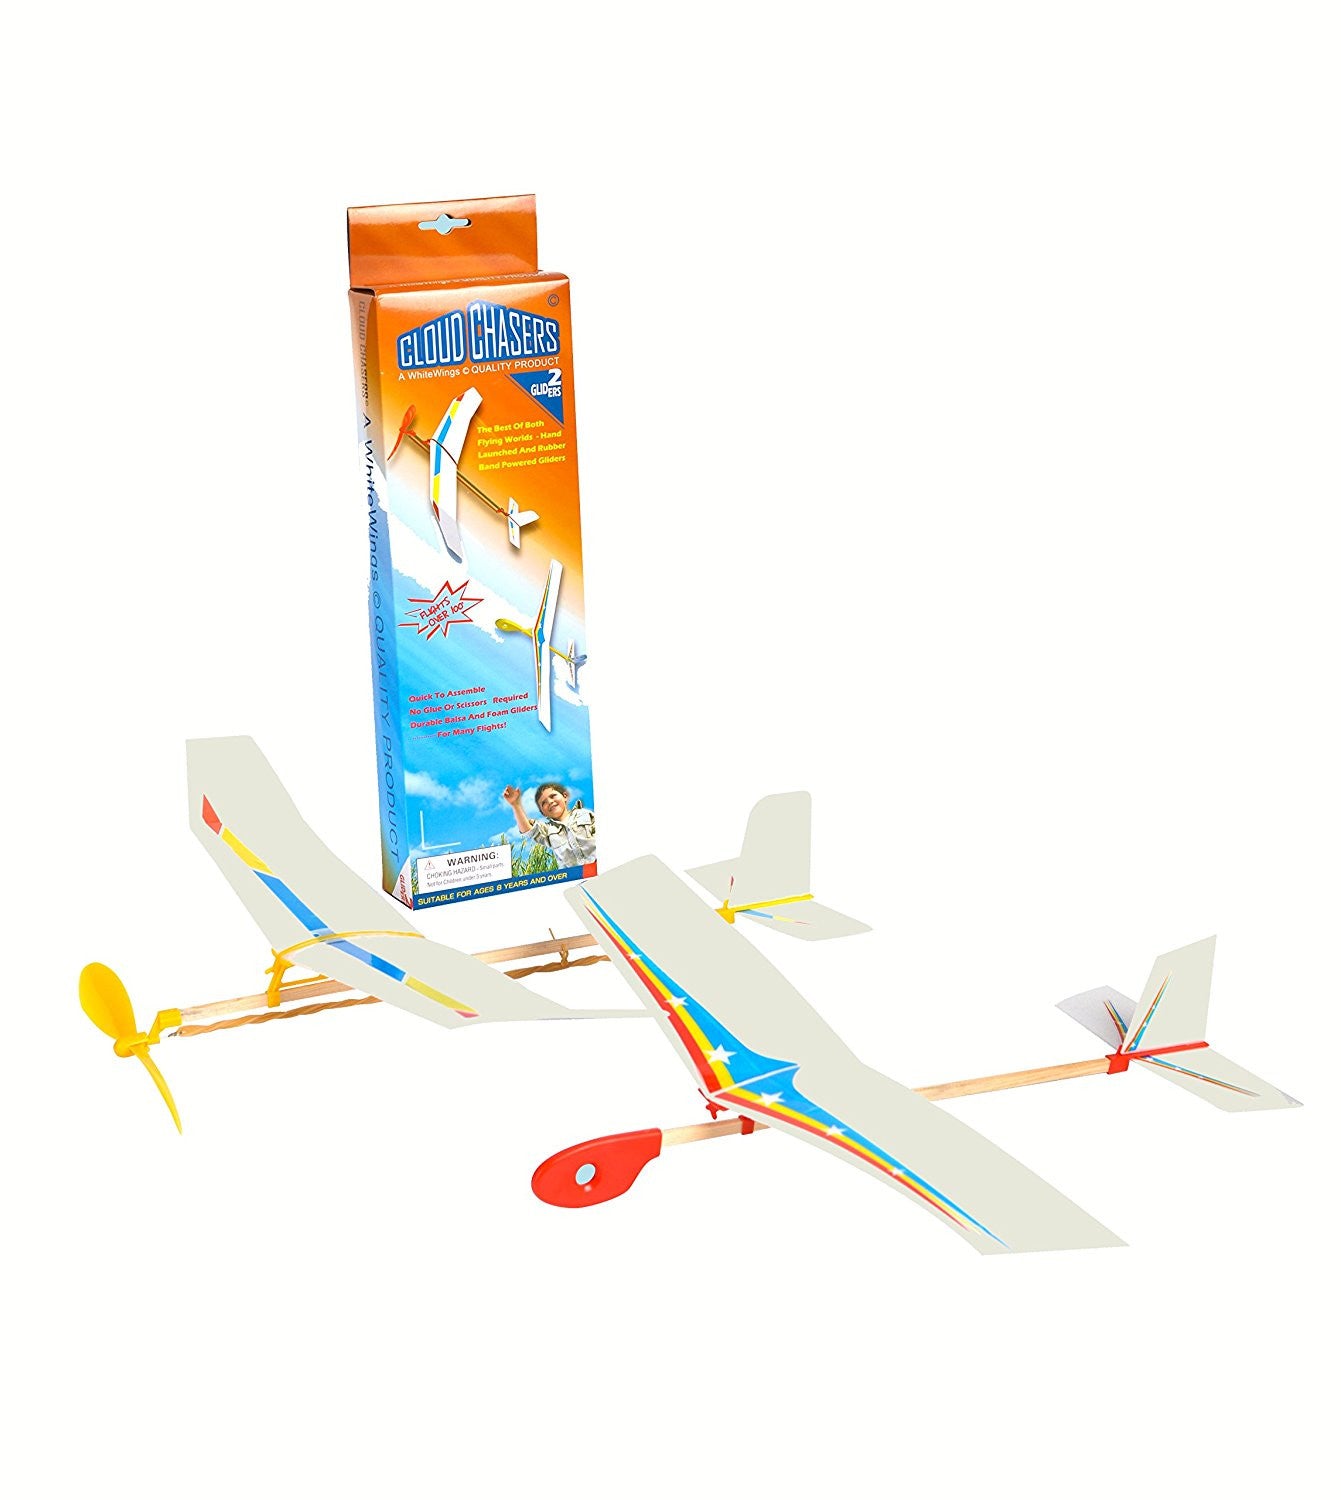 Be Amazing Toys Cloud Chasers - 2 Plane Kit Z0145